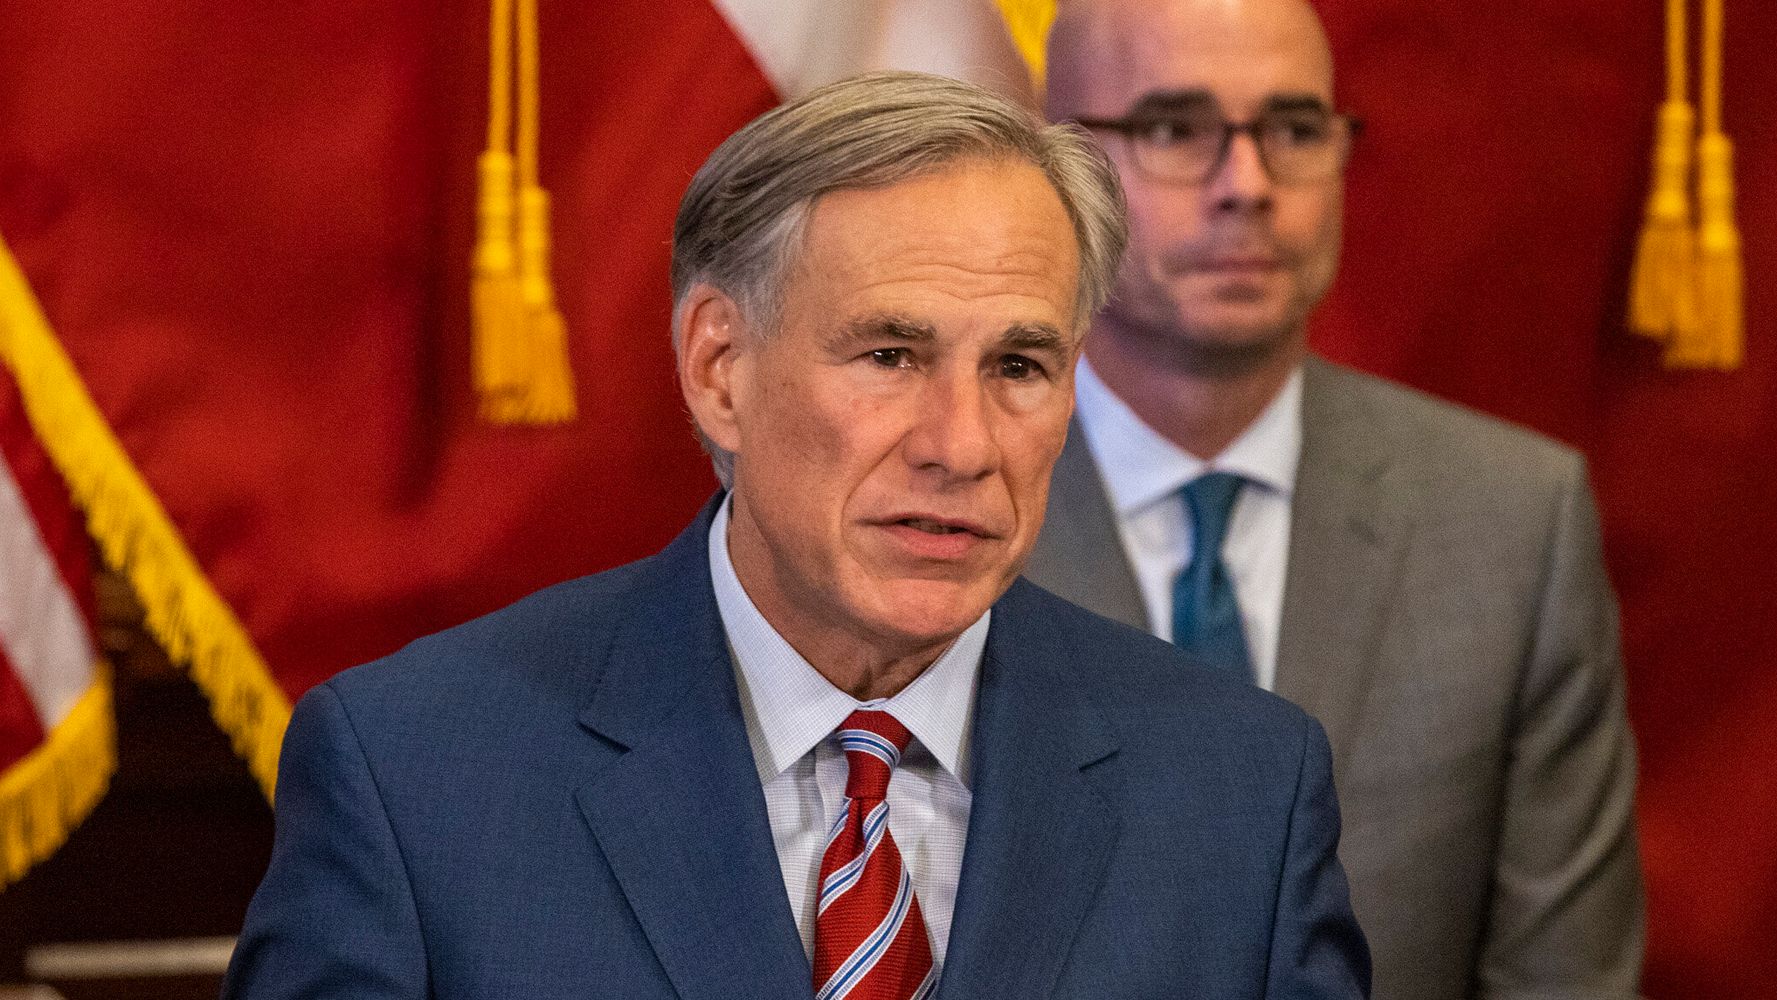 Texas Governor Signs Law To Stop Teachers From Talking About Racism